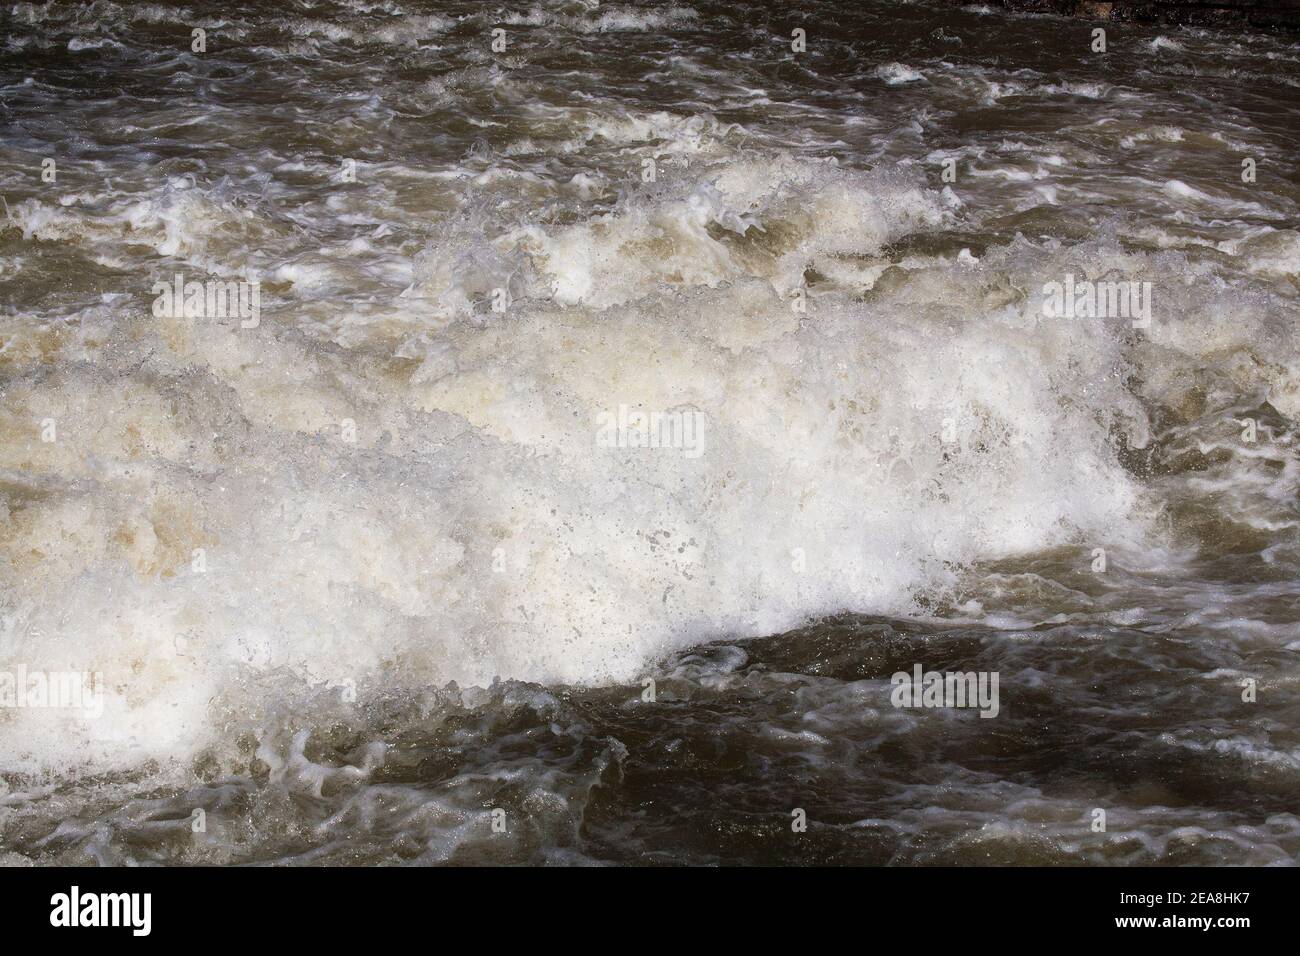 RUSHING masses of WATER in the river Stock Photo